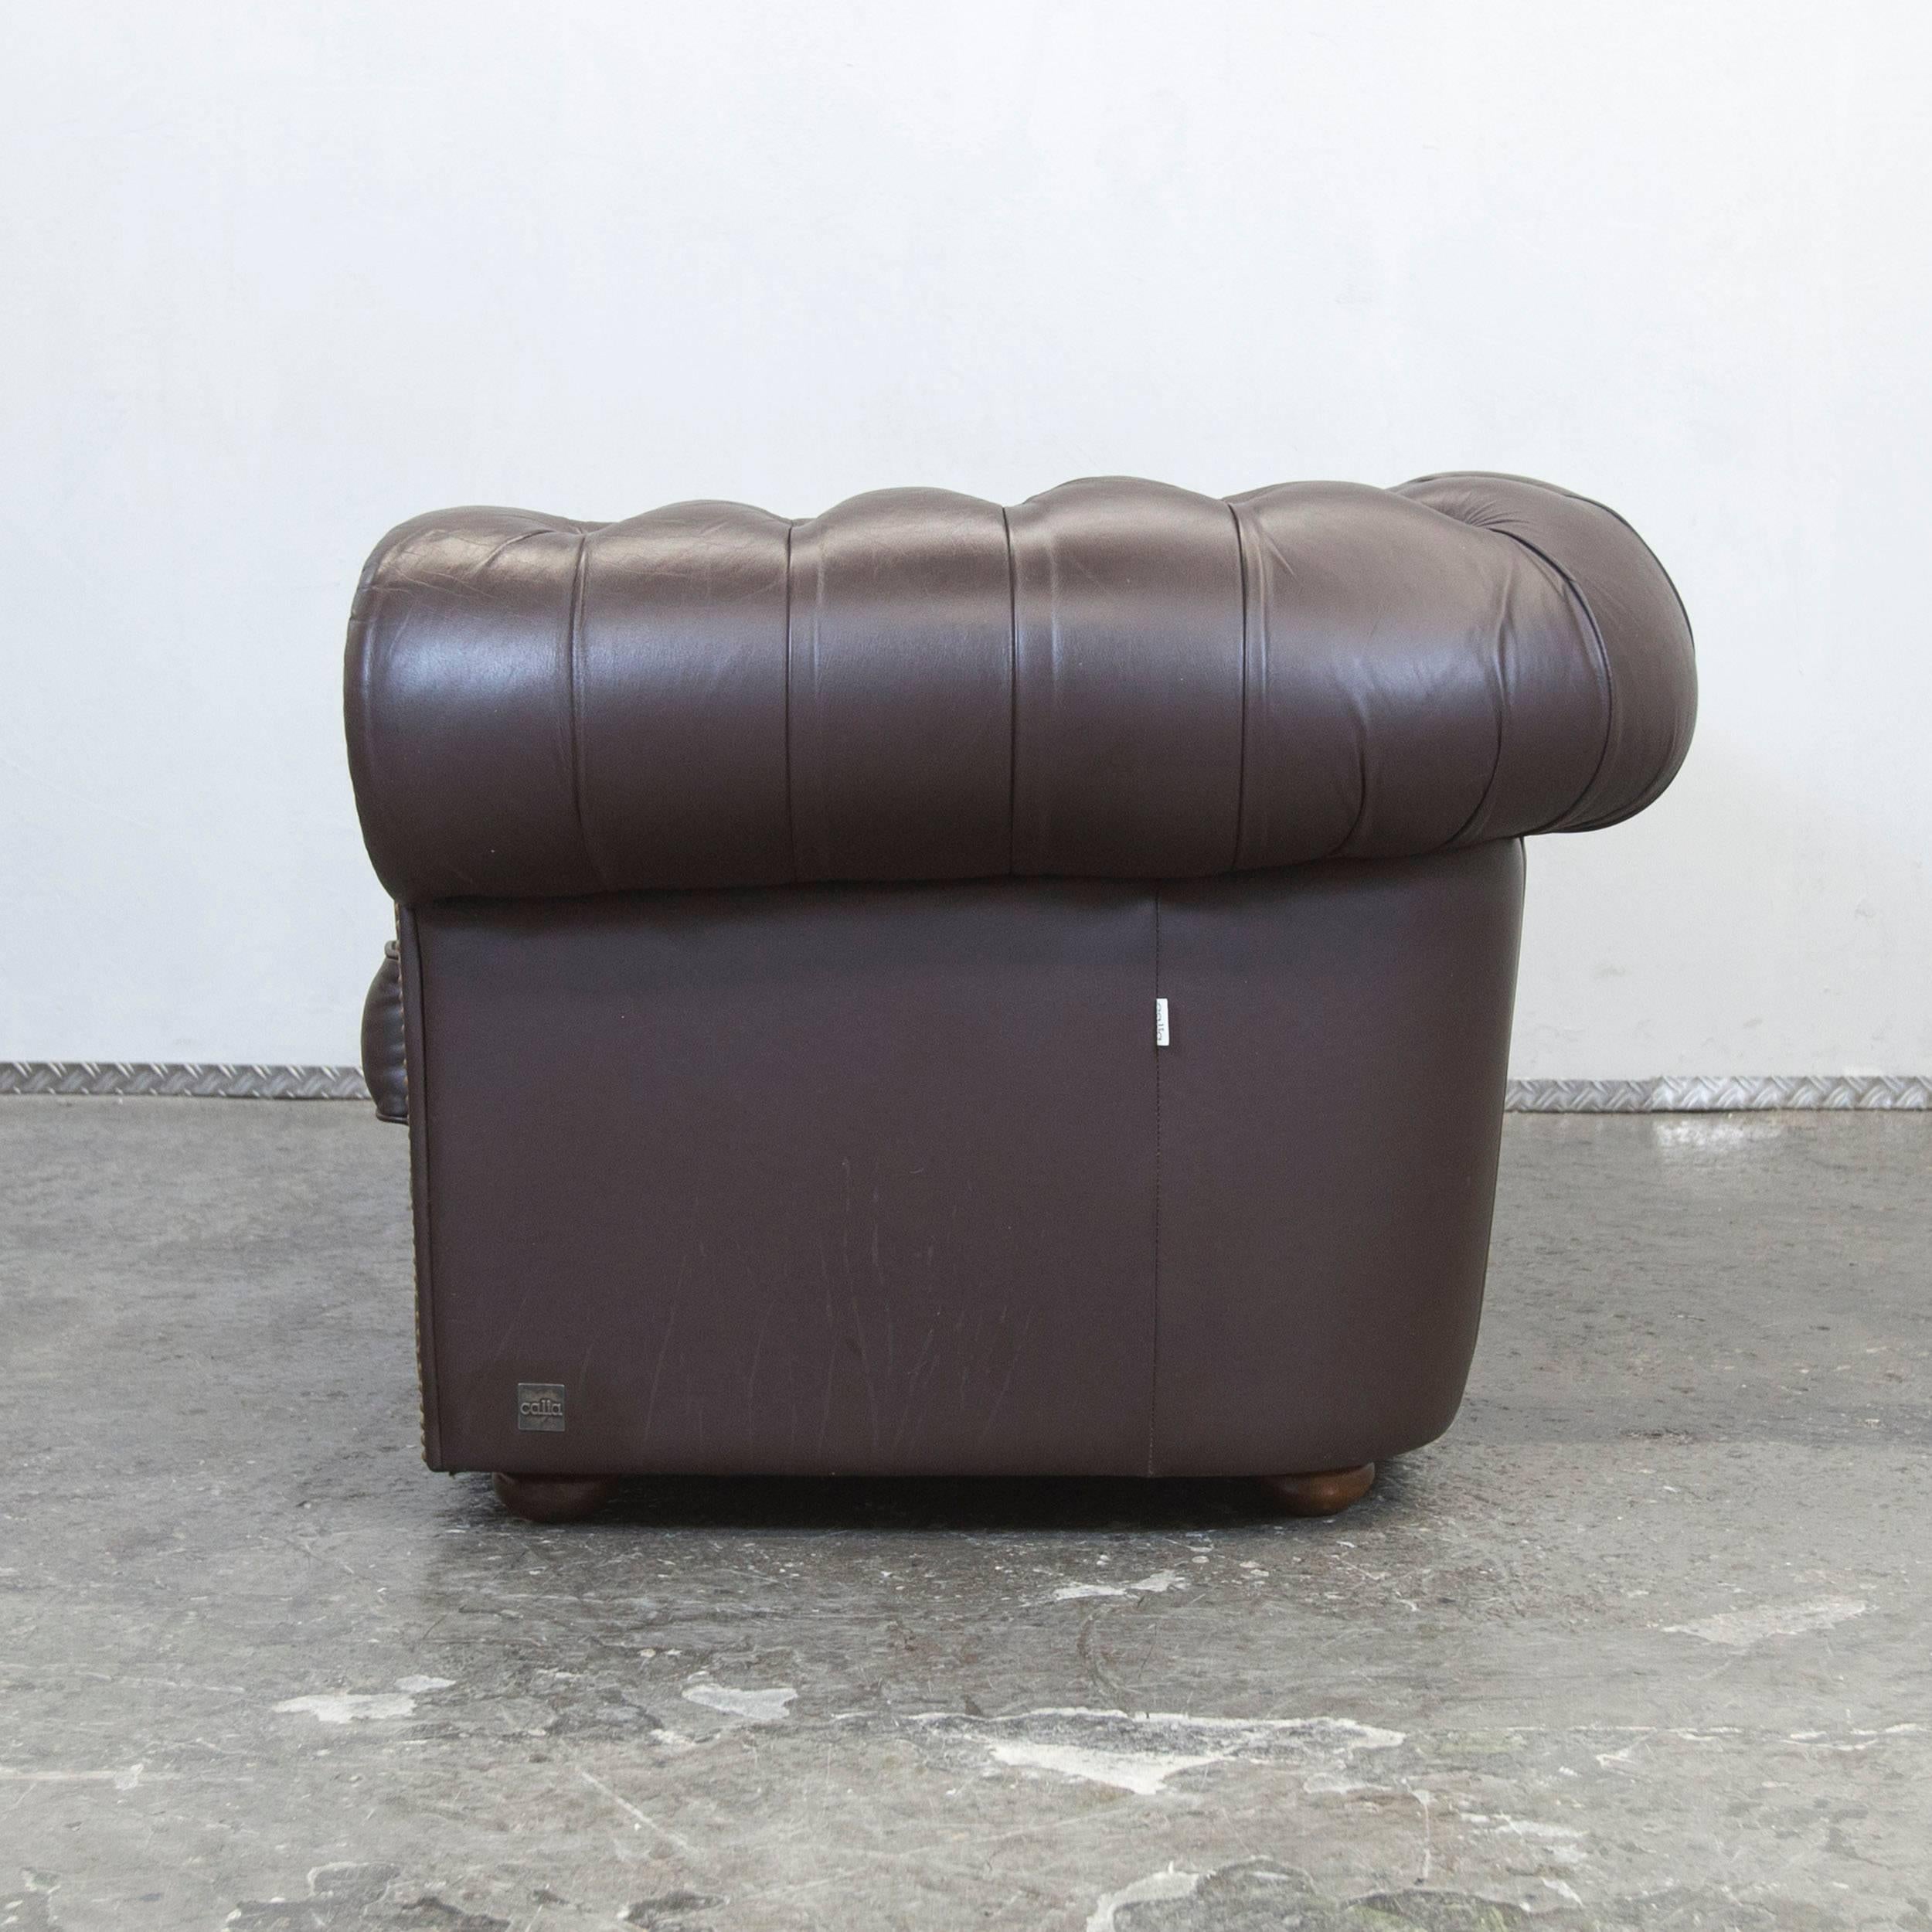 Calia Chesterfield Sofa Brown Leather Three-Seat Couch Vintage Retro 3